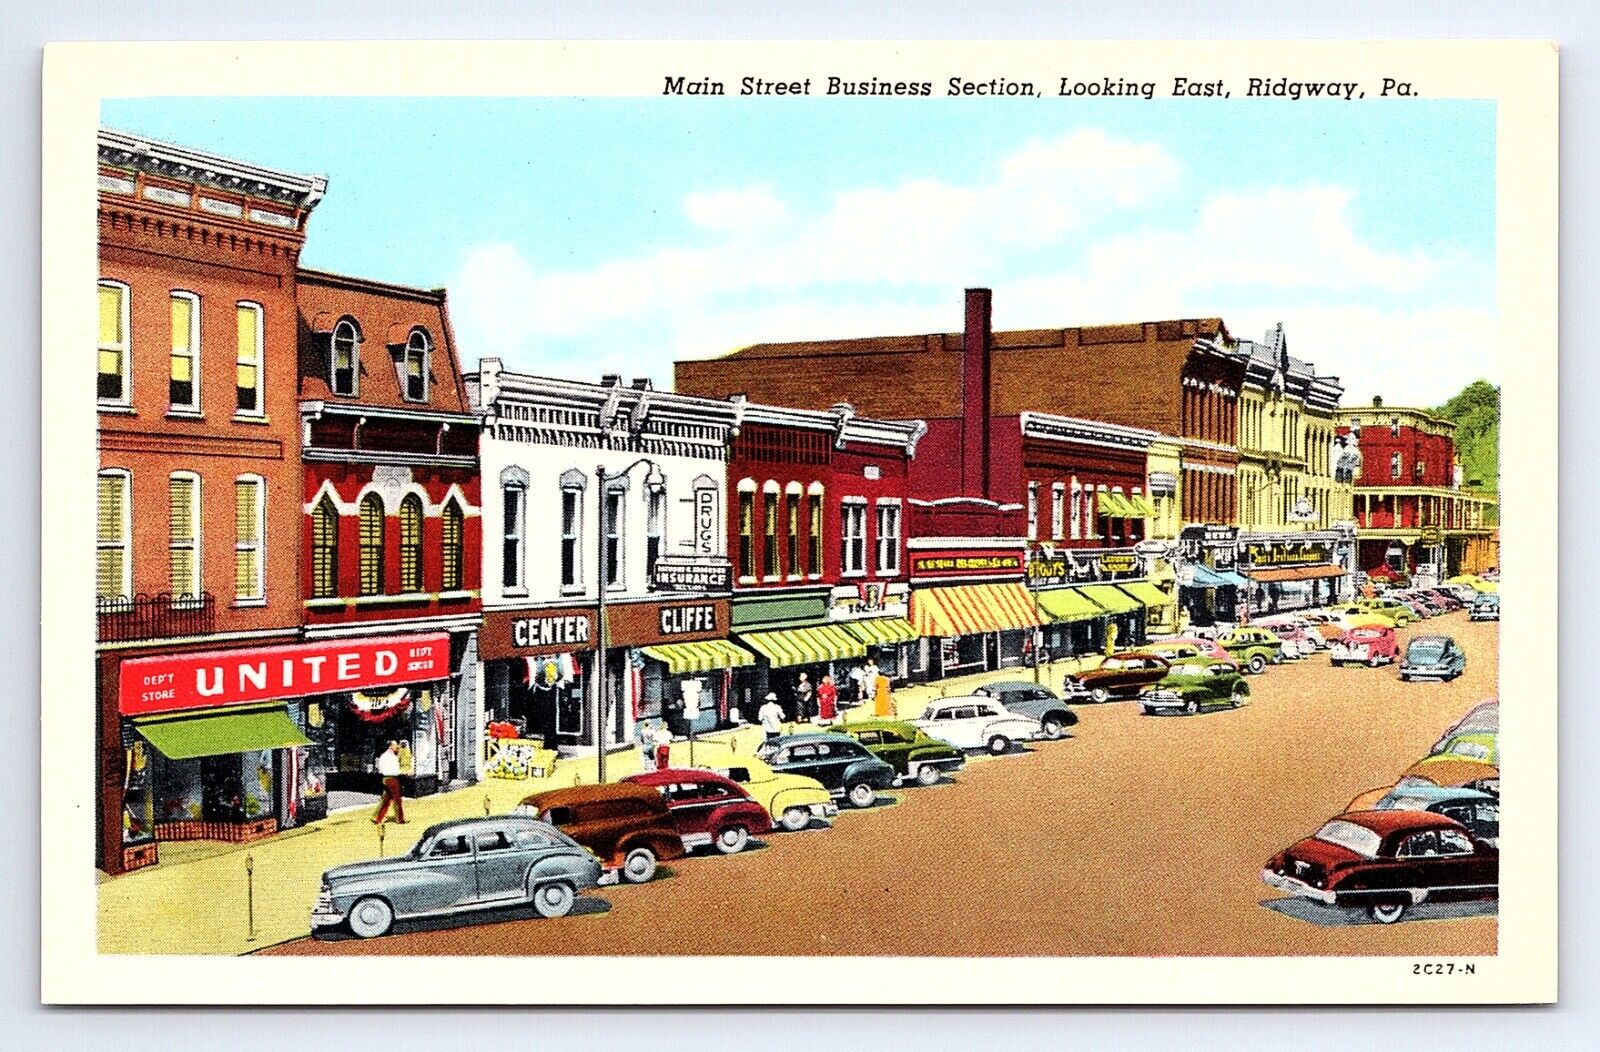 Postcard Ridgway Pennsylvania Main Street Business Section Old Cars Storefronts